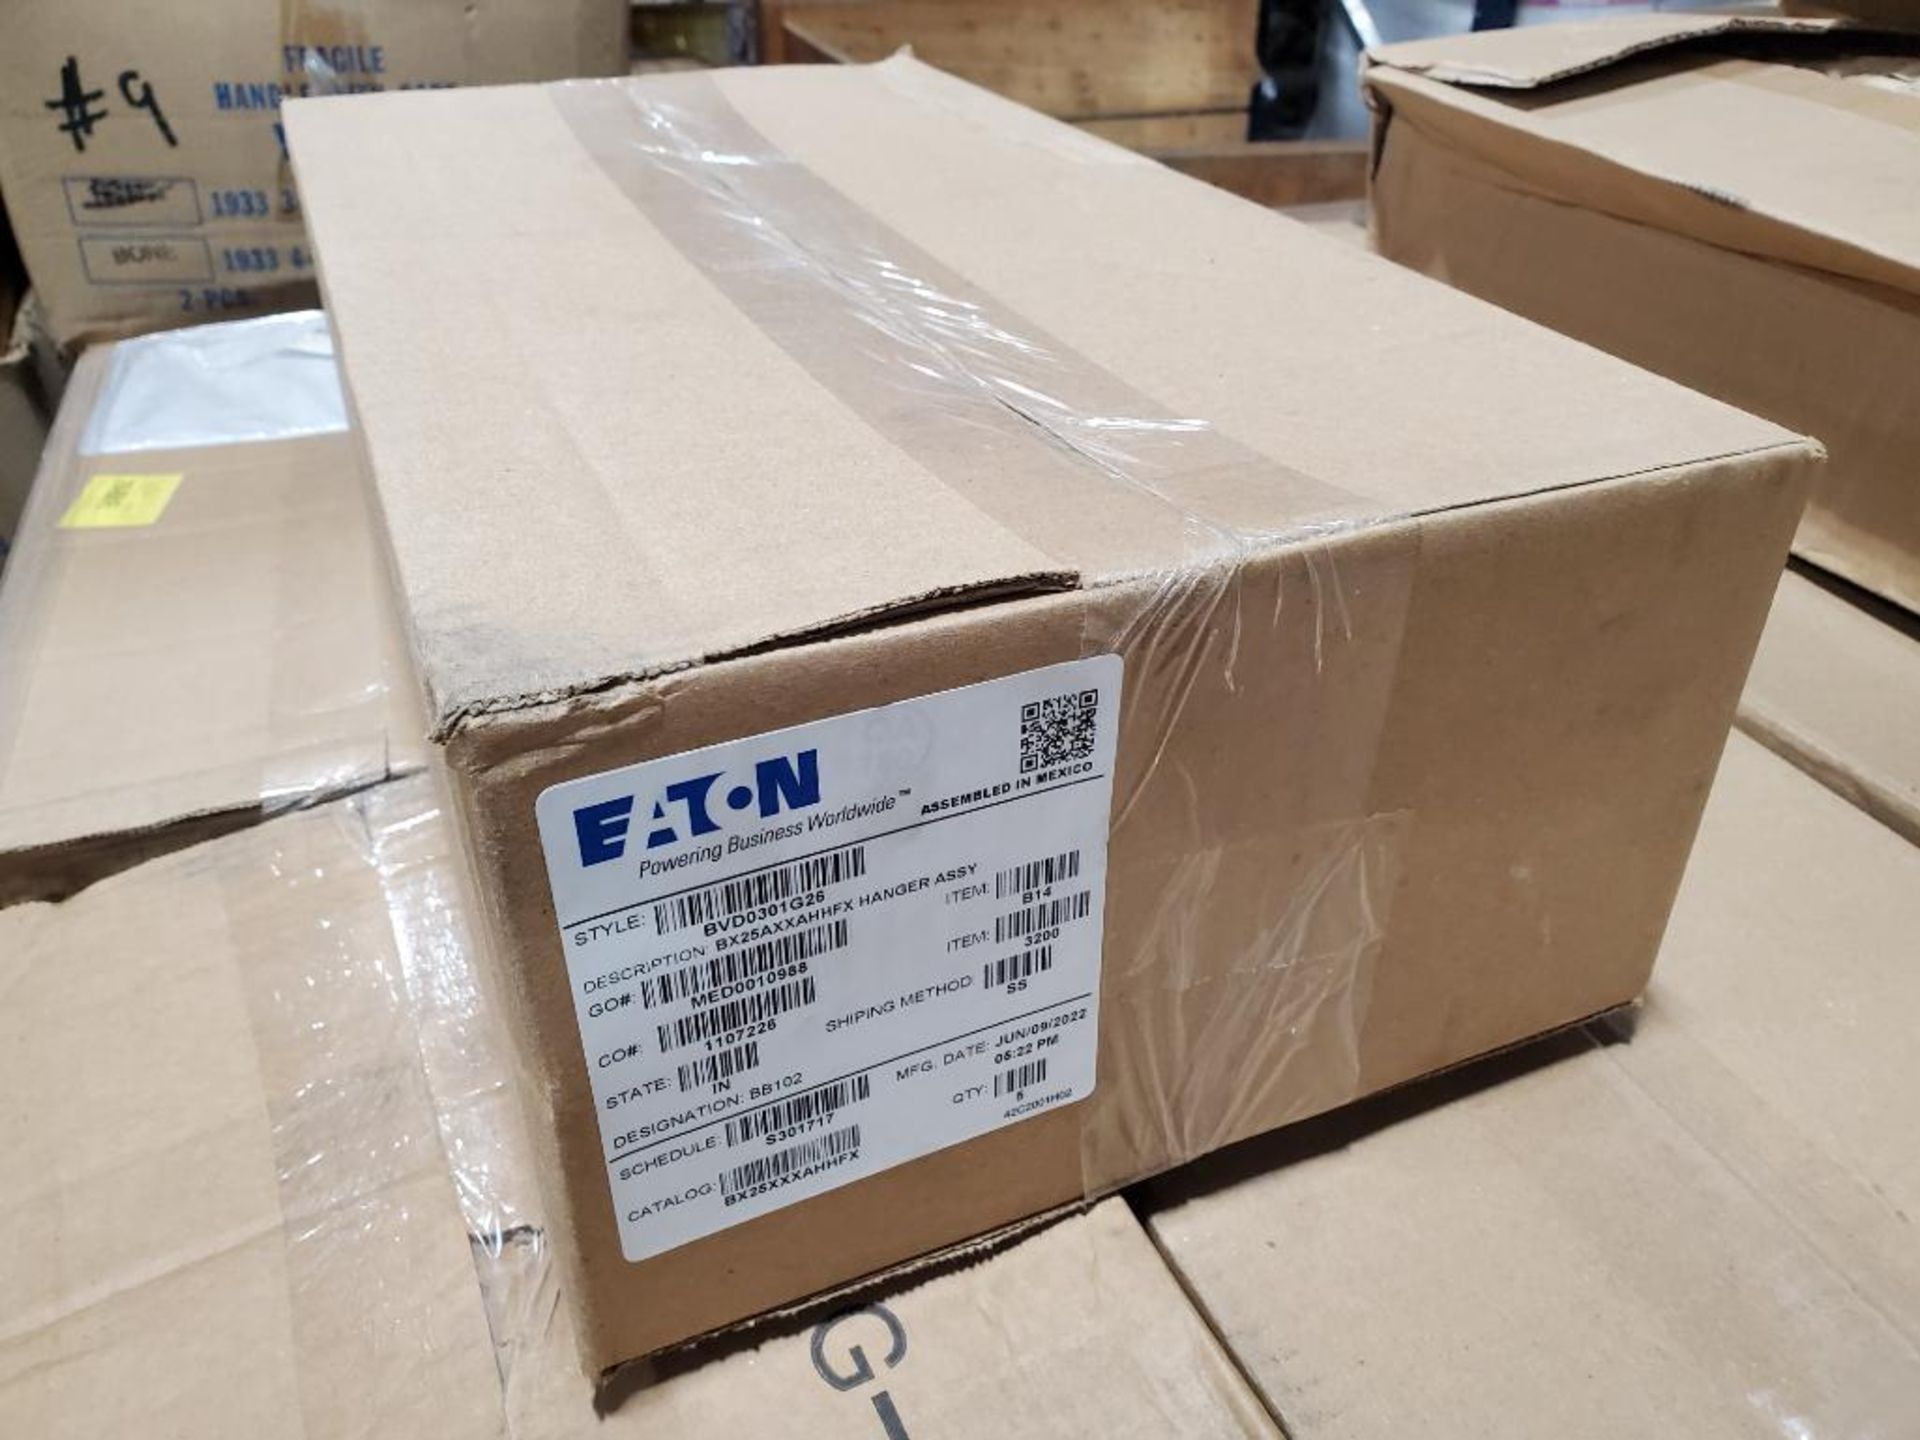 Qty 50 - Eaton bus duct hanger. Style BVD0301G26. Catalog BX25AXXAHHFX. (10 boxes of 5 each) - Image 2 of 3